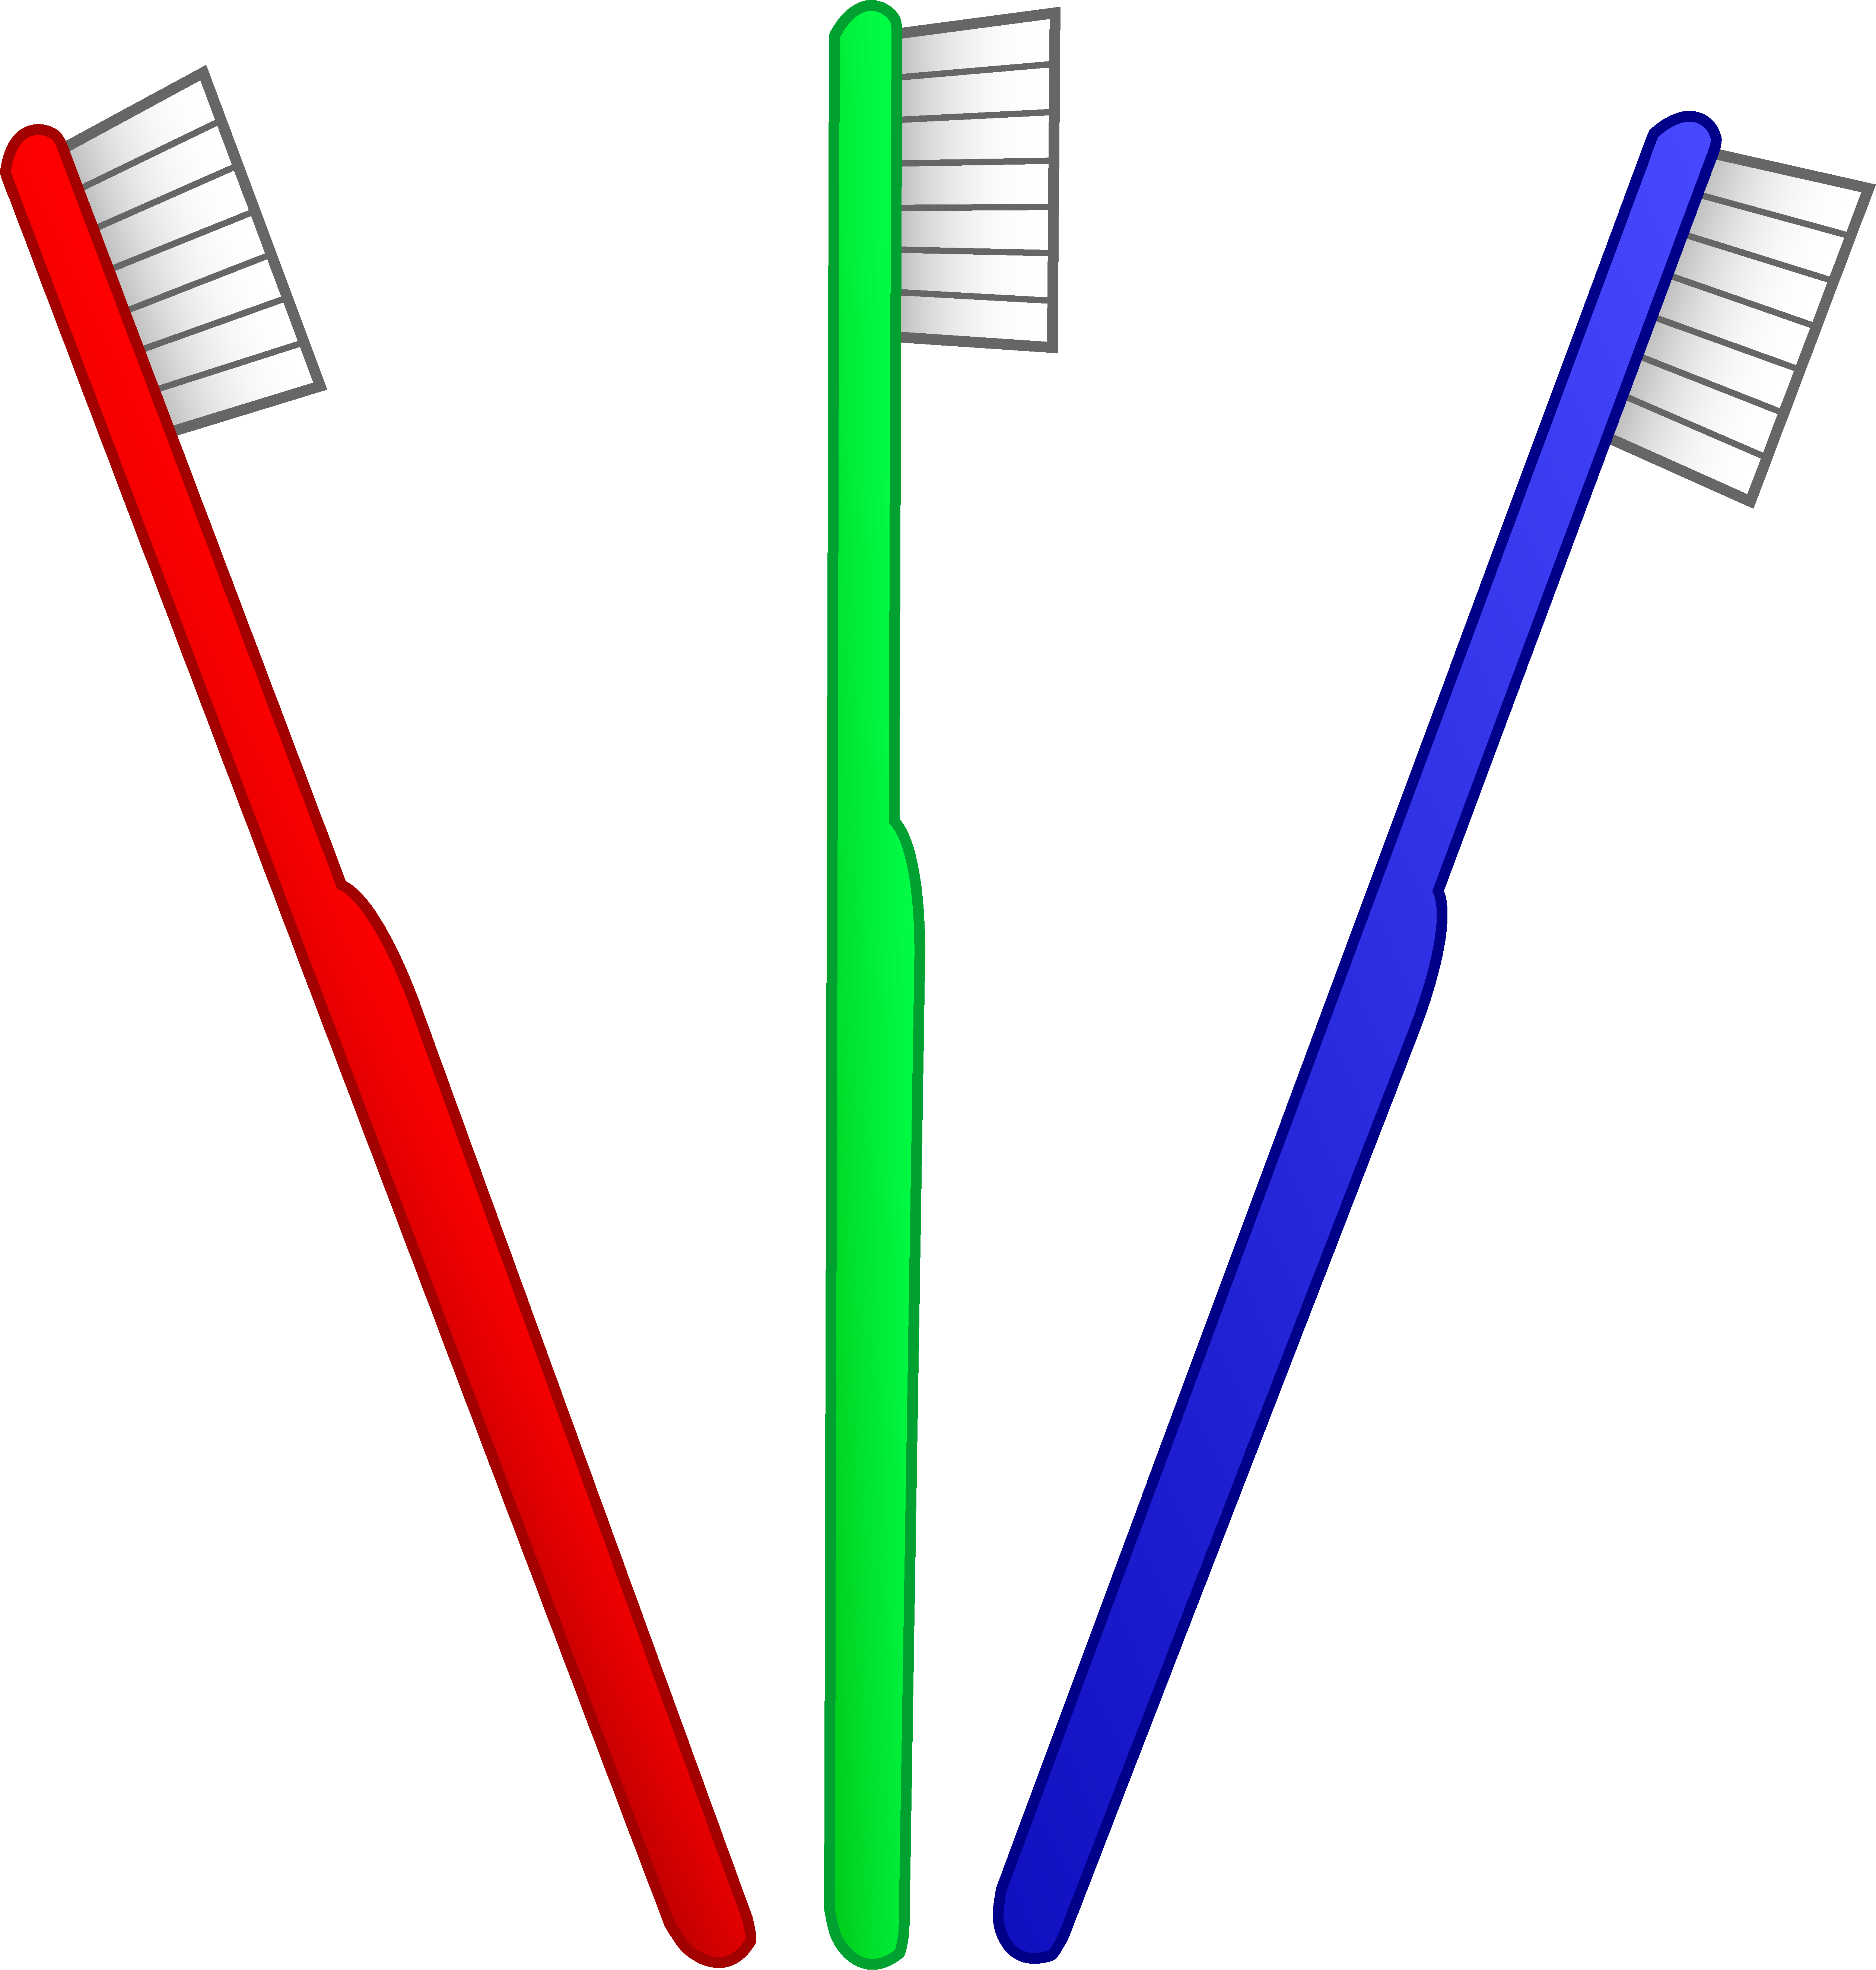 Three Toothbrushes.